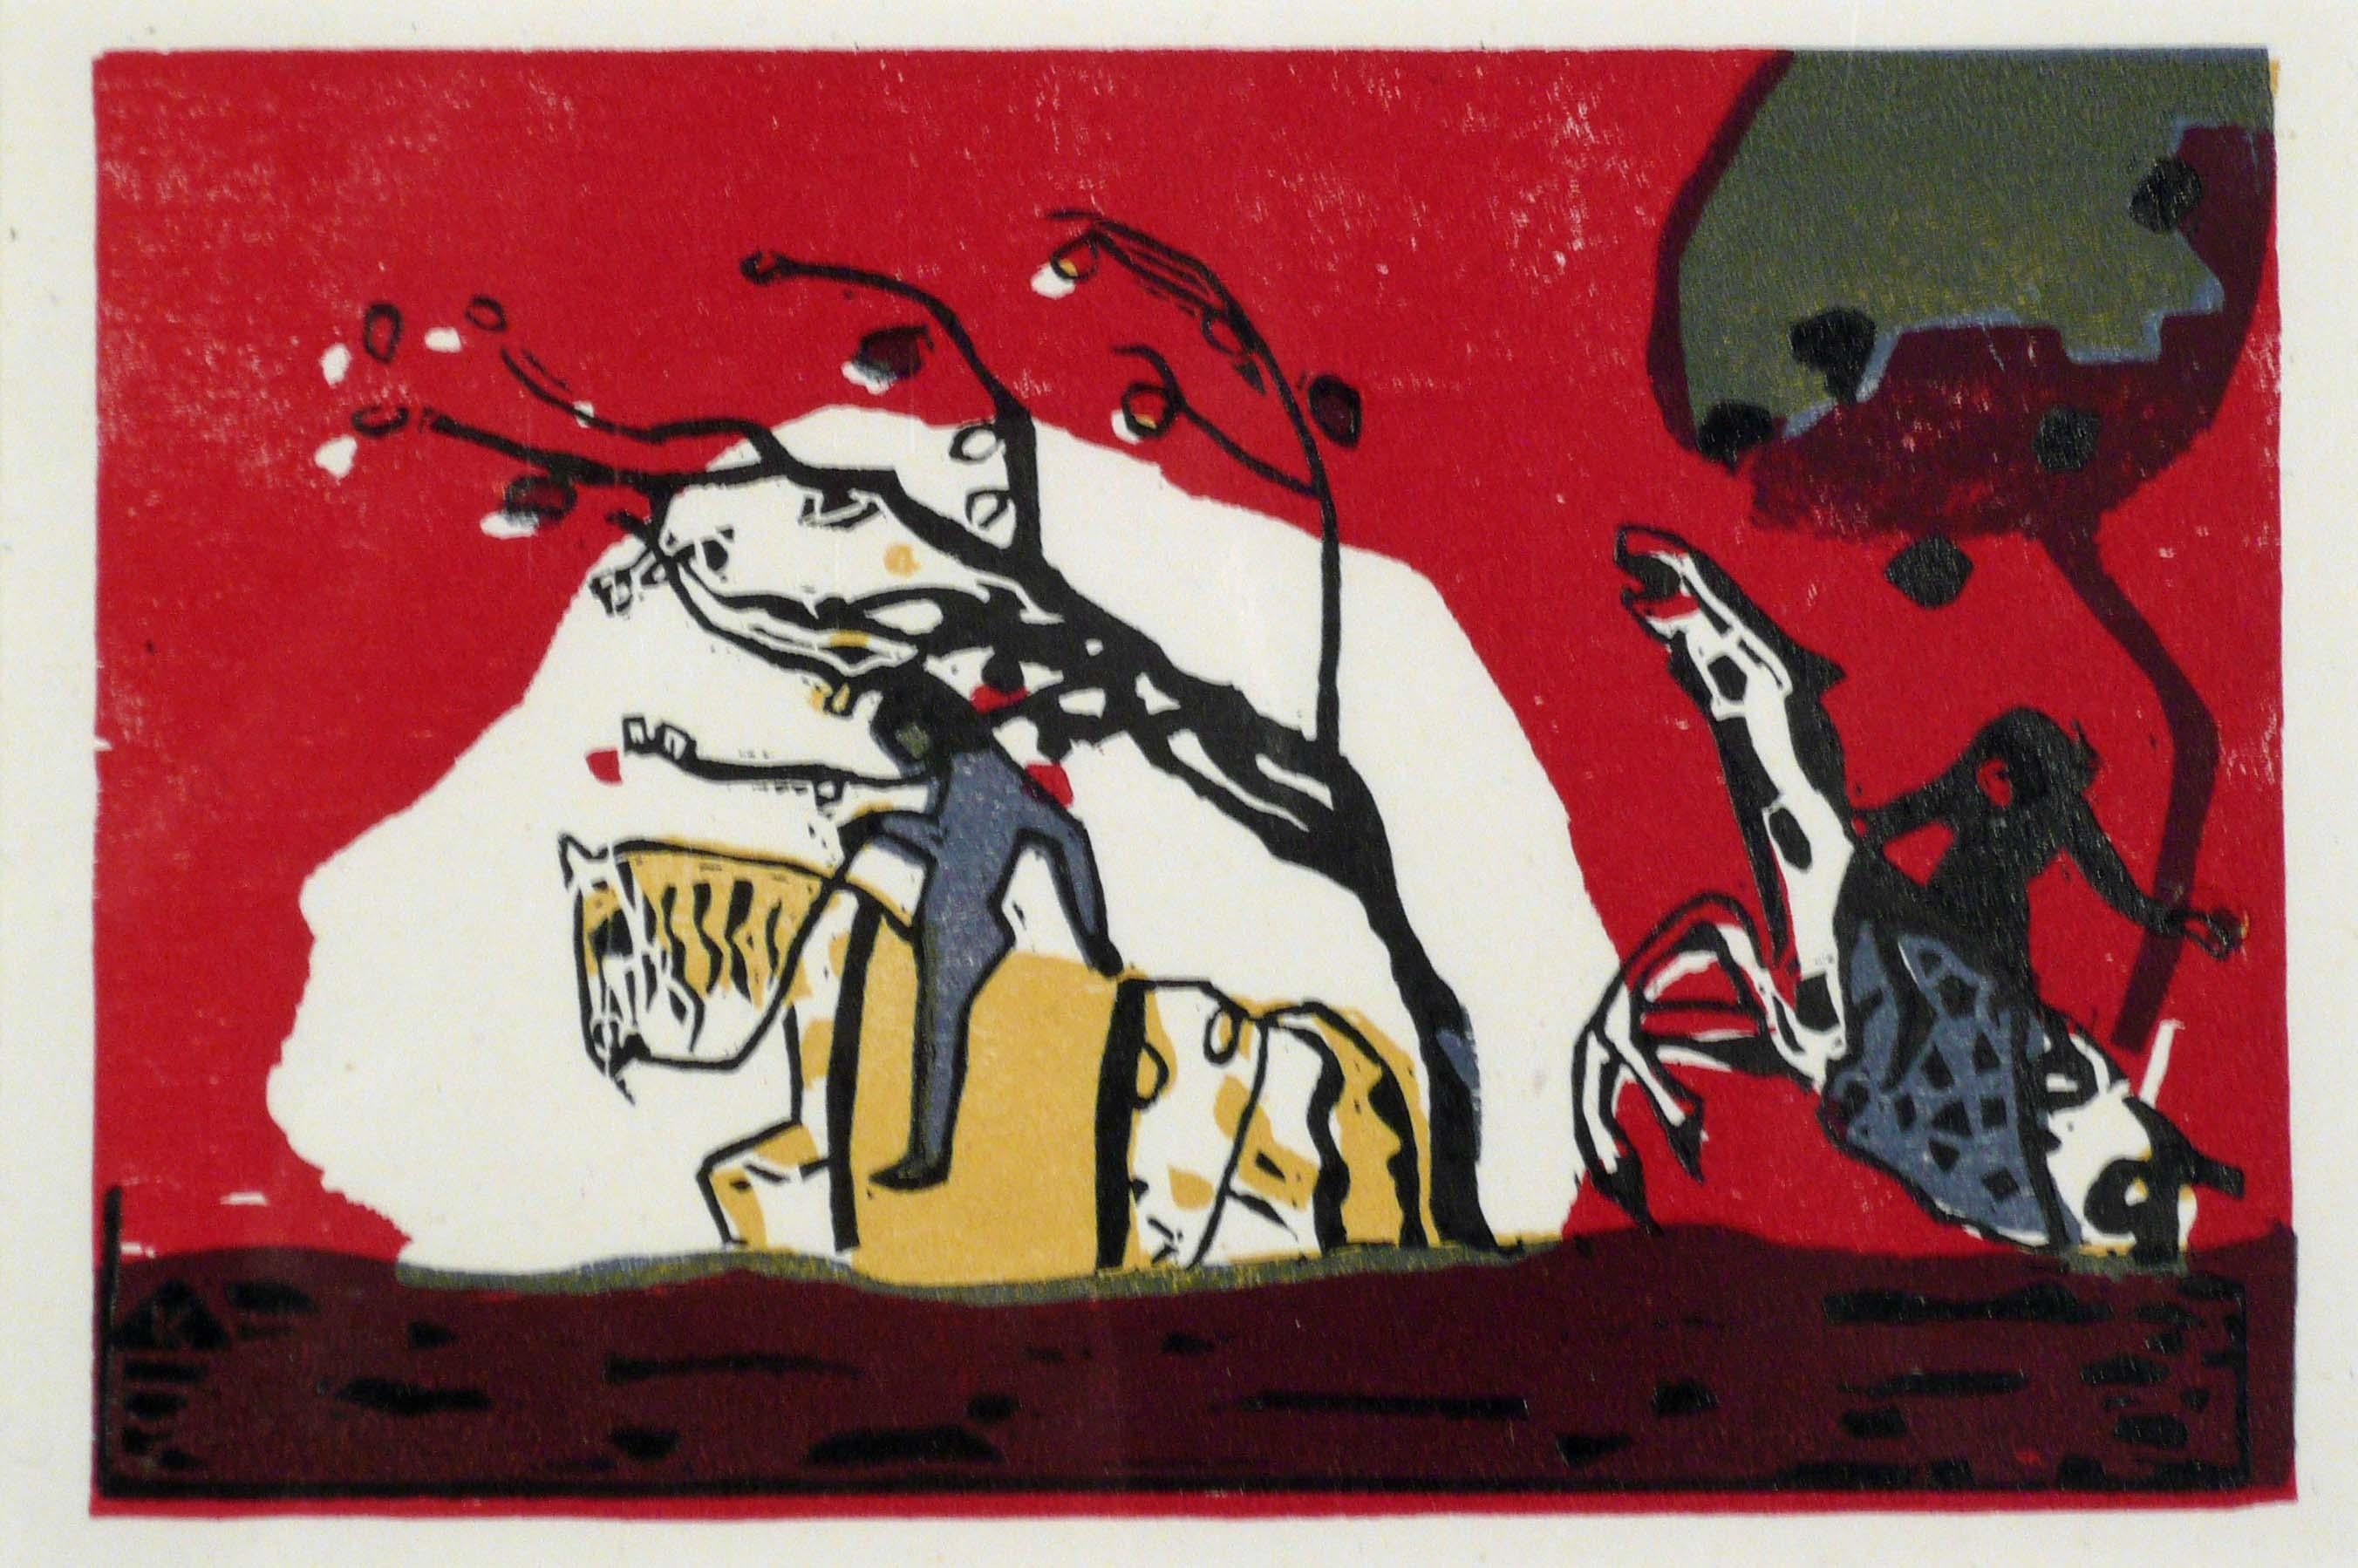 Wassily Kandinsky Abstract Print - ZWEI REITER VOR ROT (TWO RIDERS AGAINST A RED BACKGROUND)